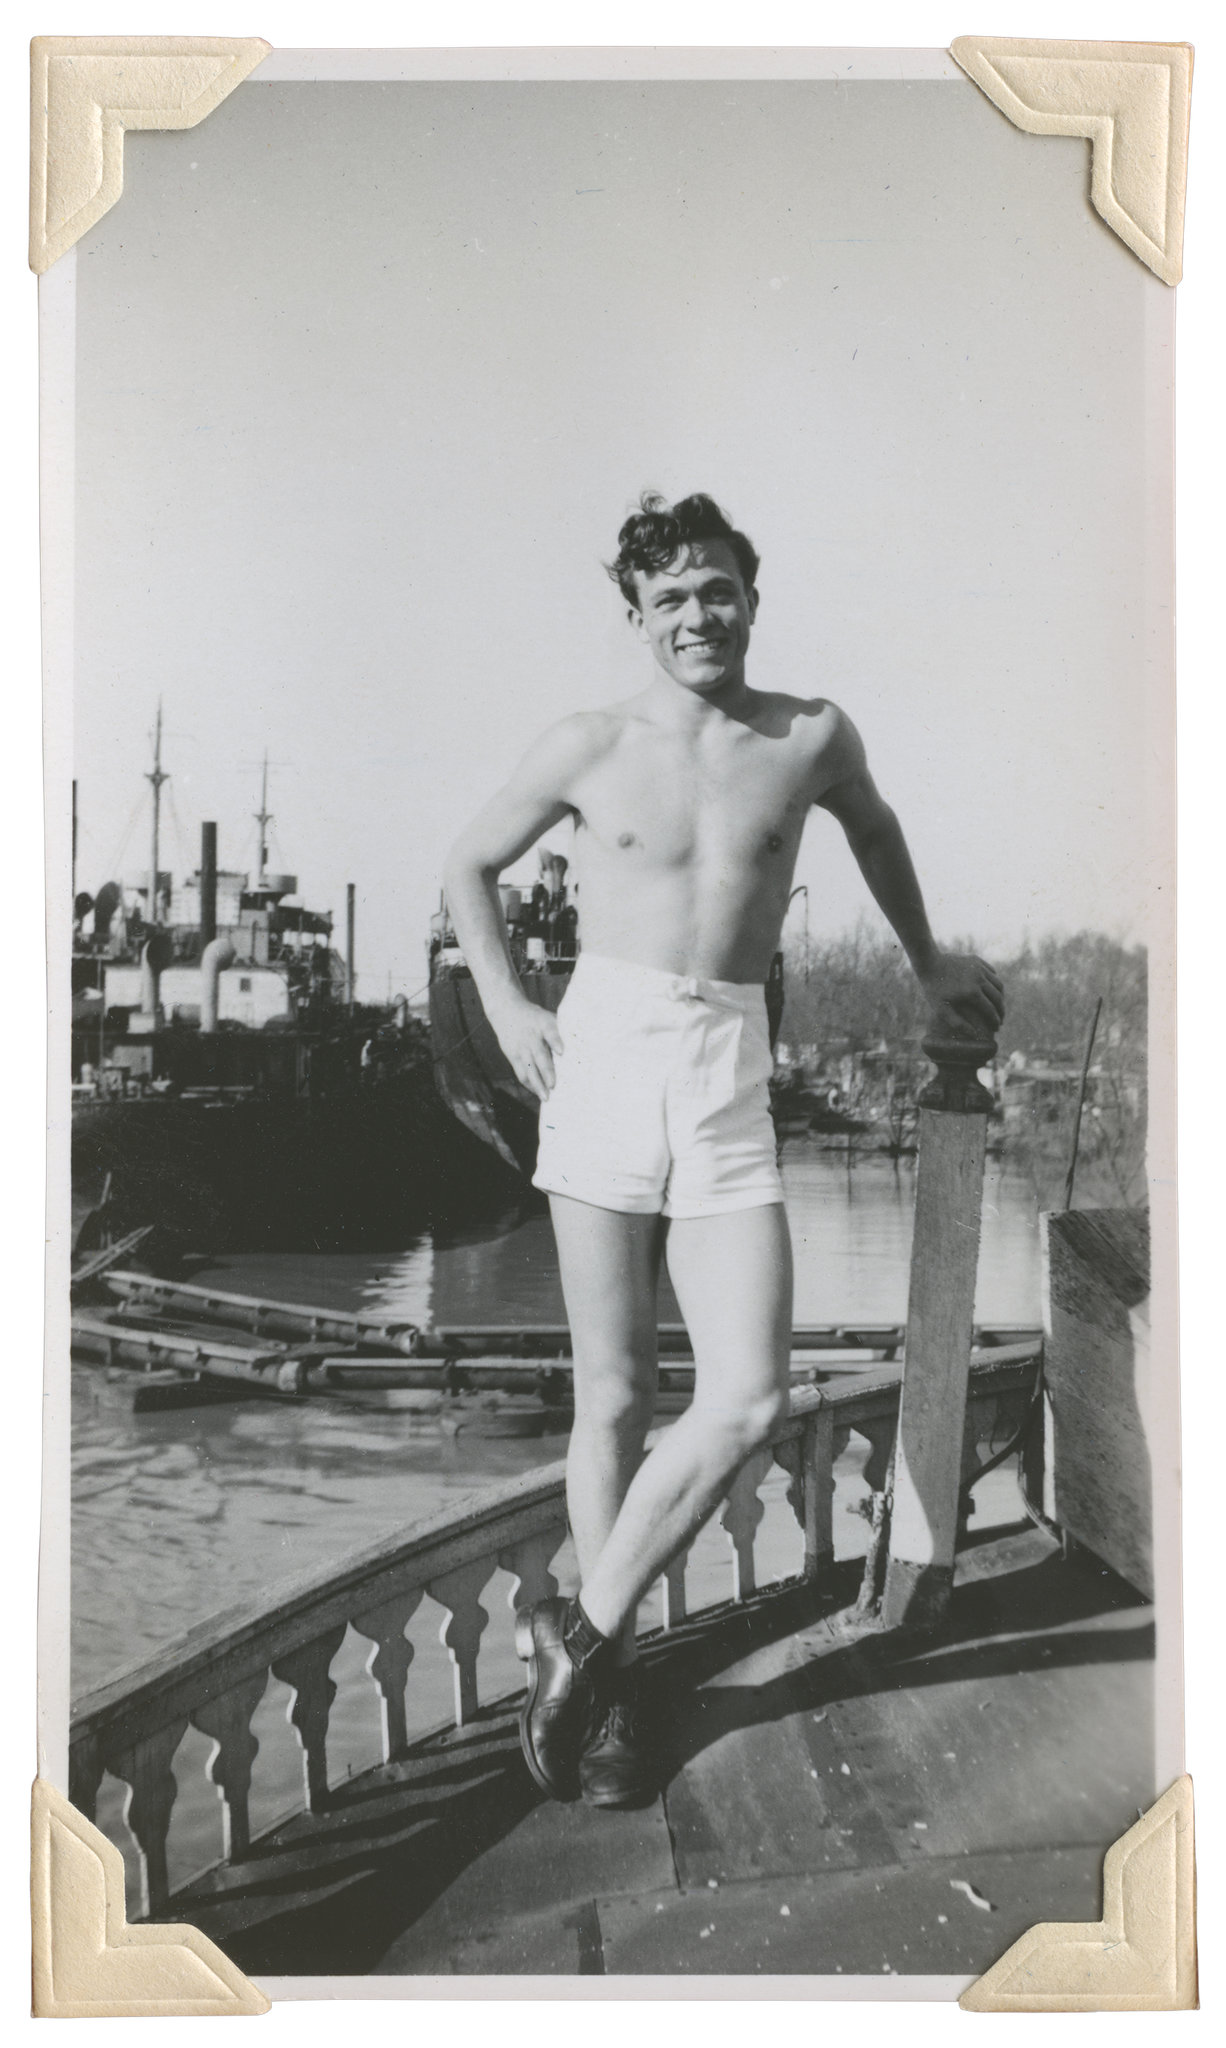 Vintage black and white photo of a slender shirtless man in shorts leaning on a fence post.